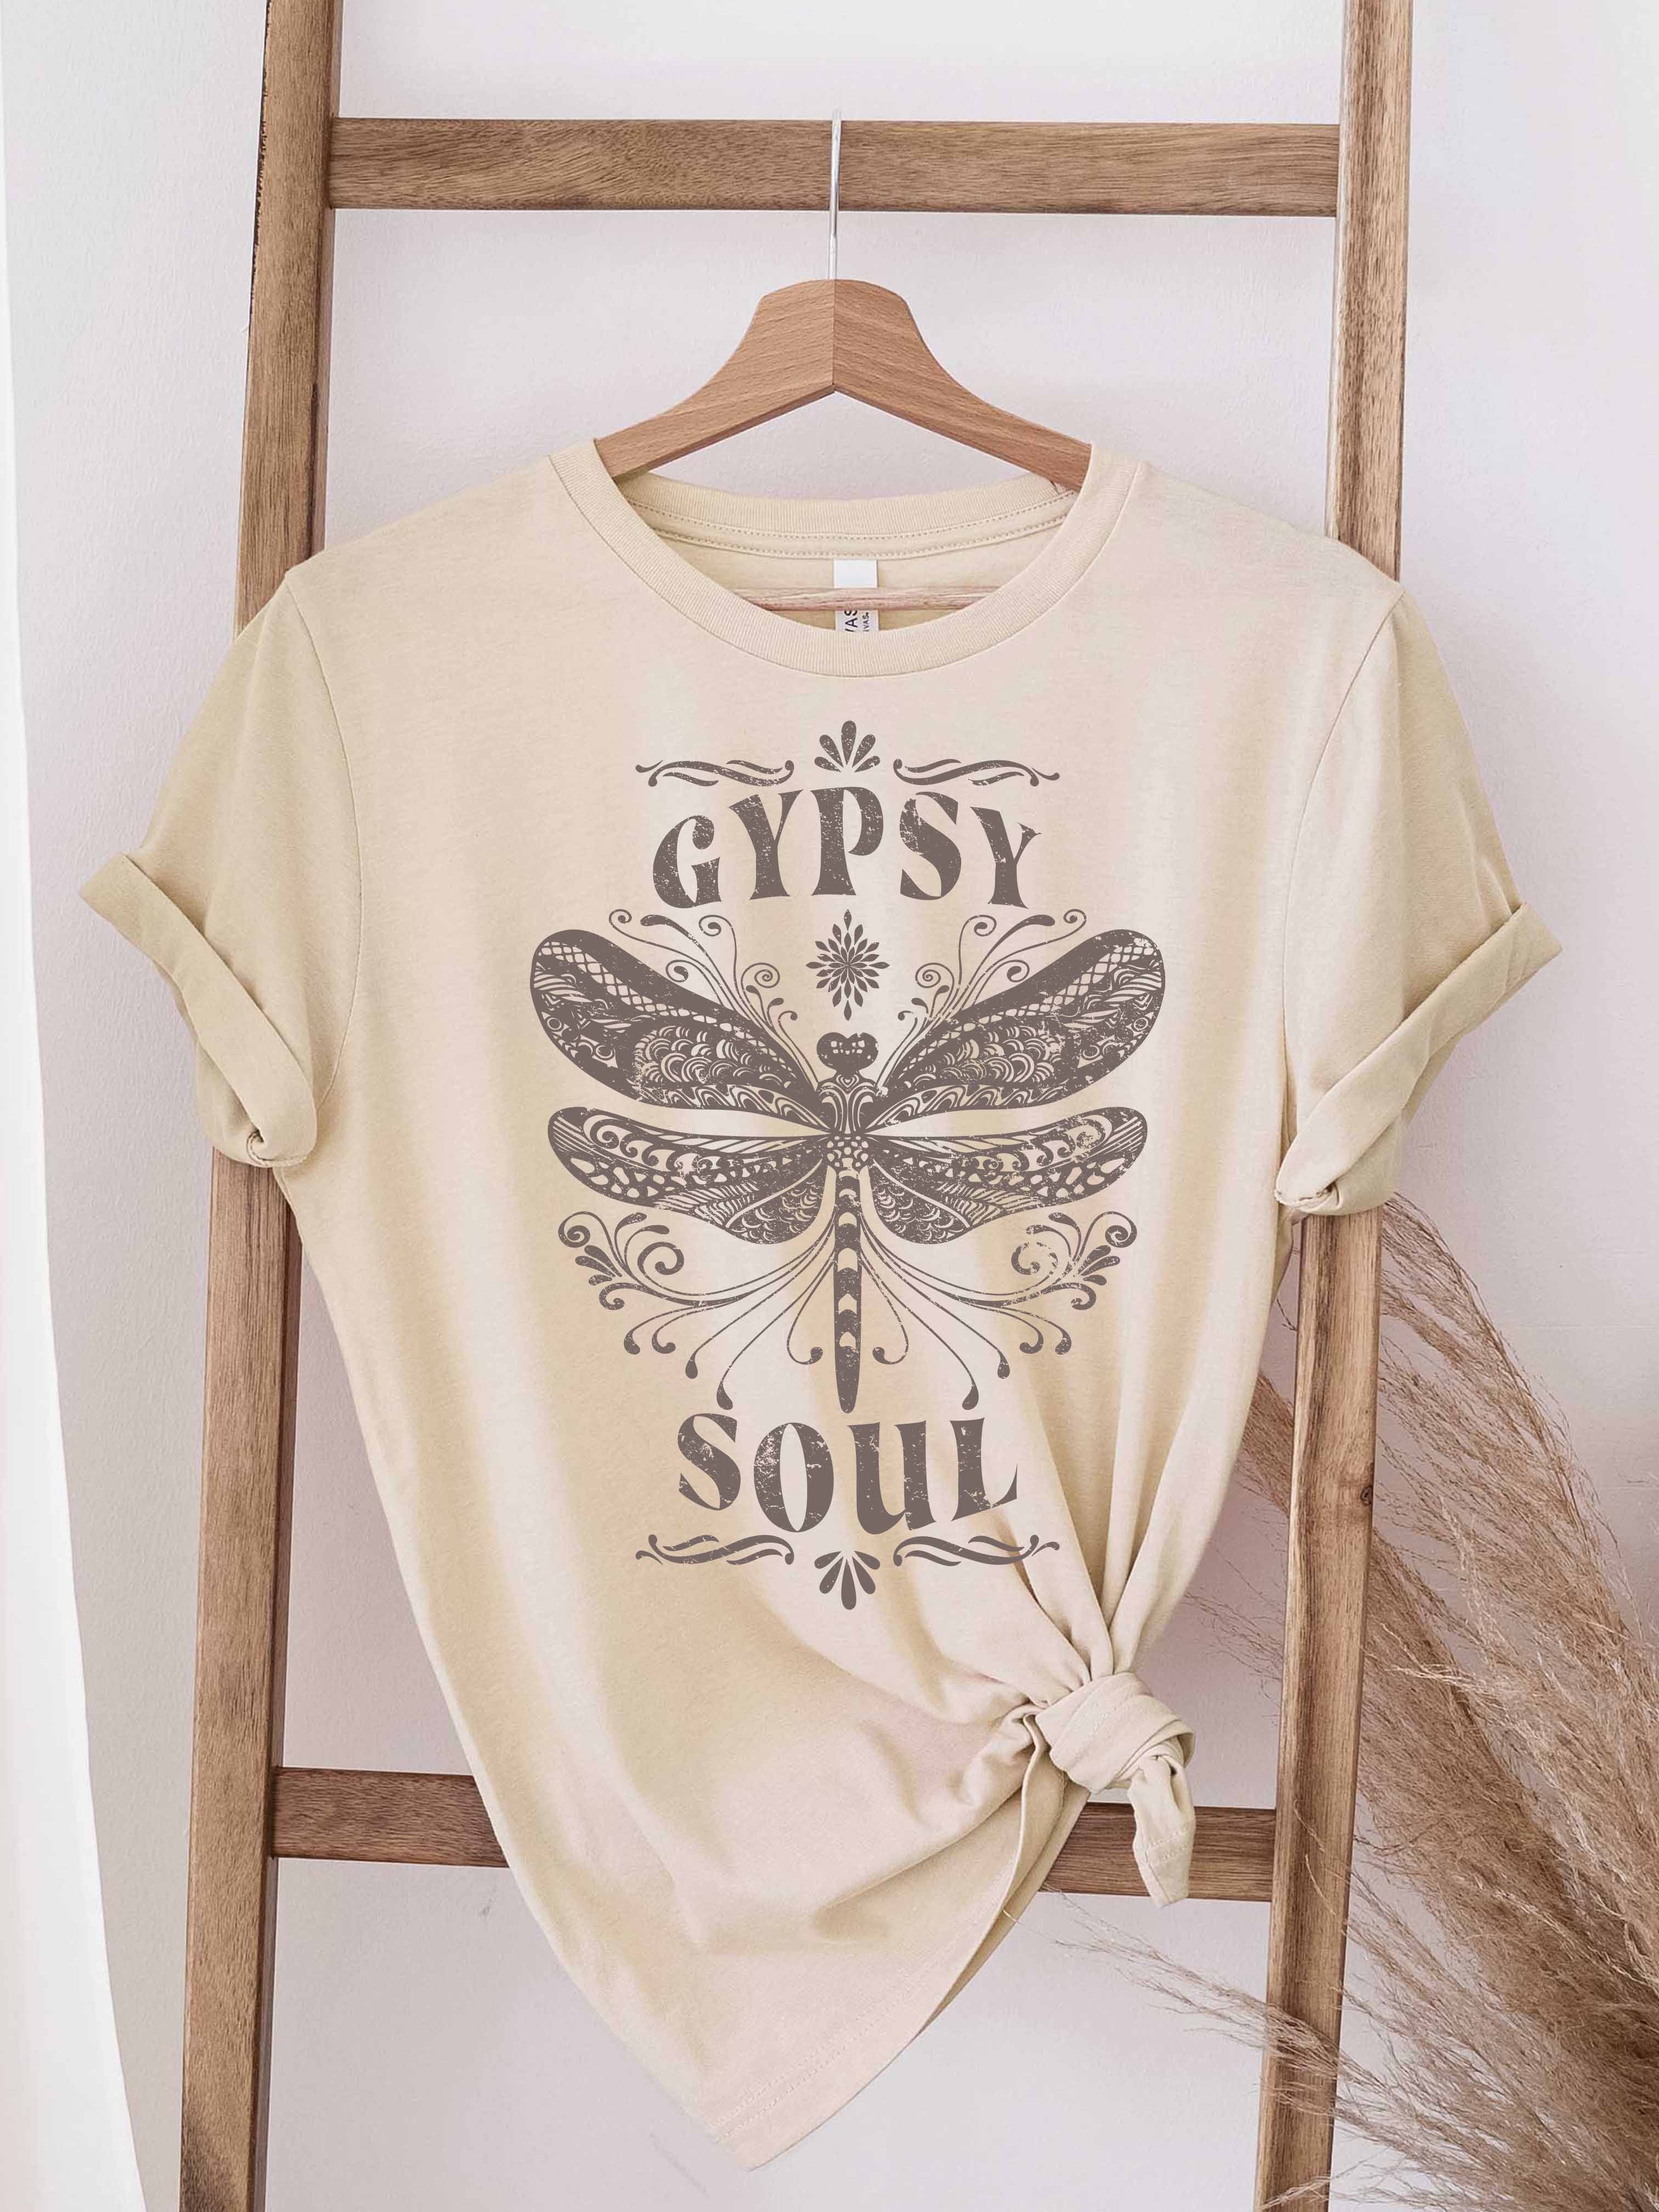 Gypsy Soul Graphic Tee Shirt Dress – Autumn Grove Clothing